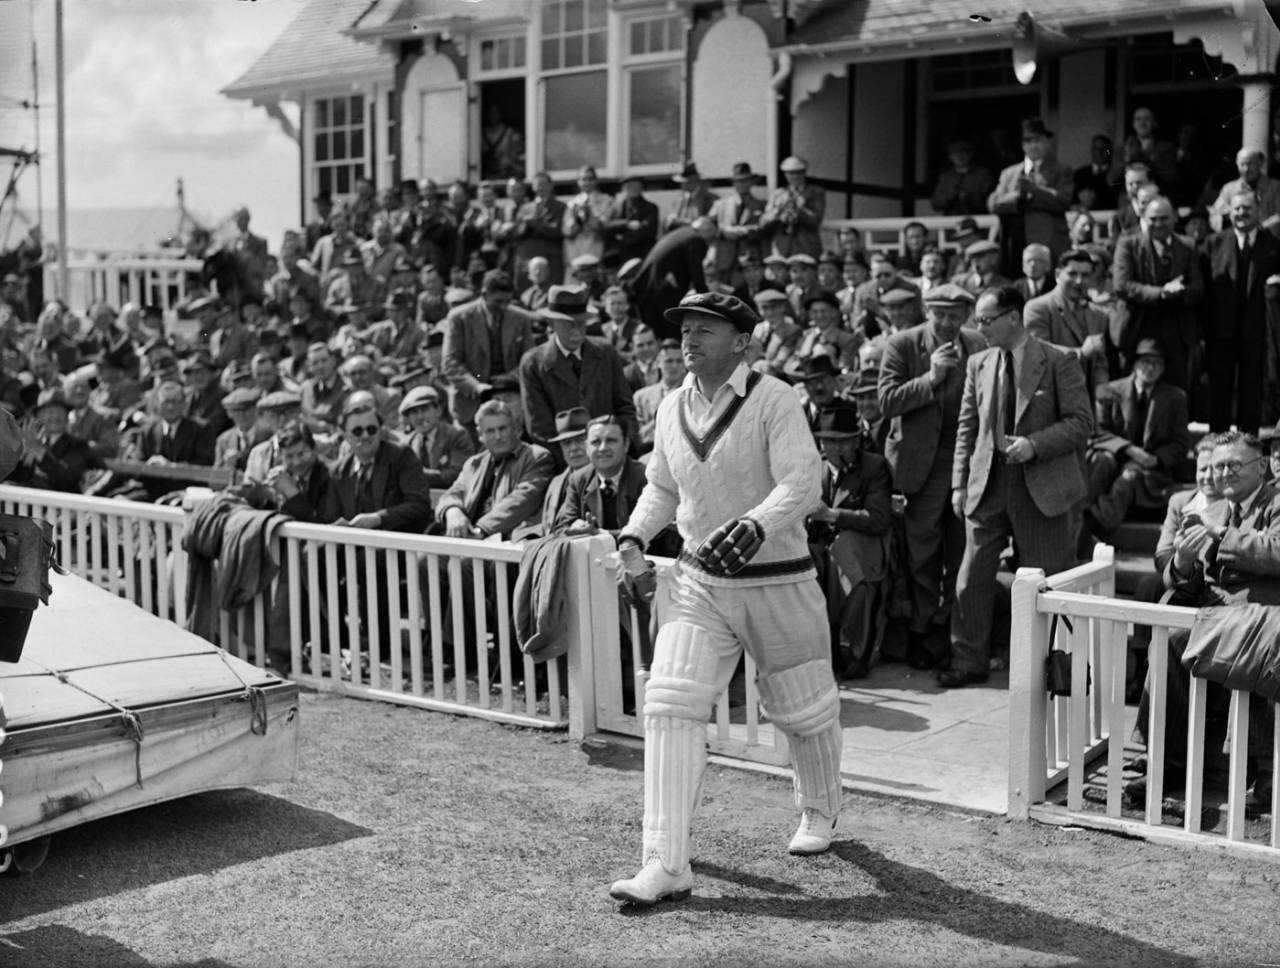 Don Bradman walks out to bat during the tour opener at Worcester. He made 107, Worcestershire v Australians, Worcester, April 29, 1948